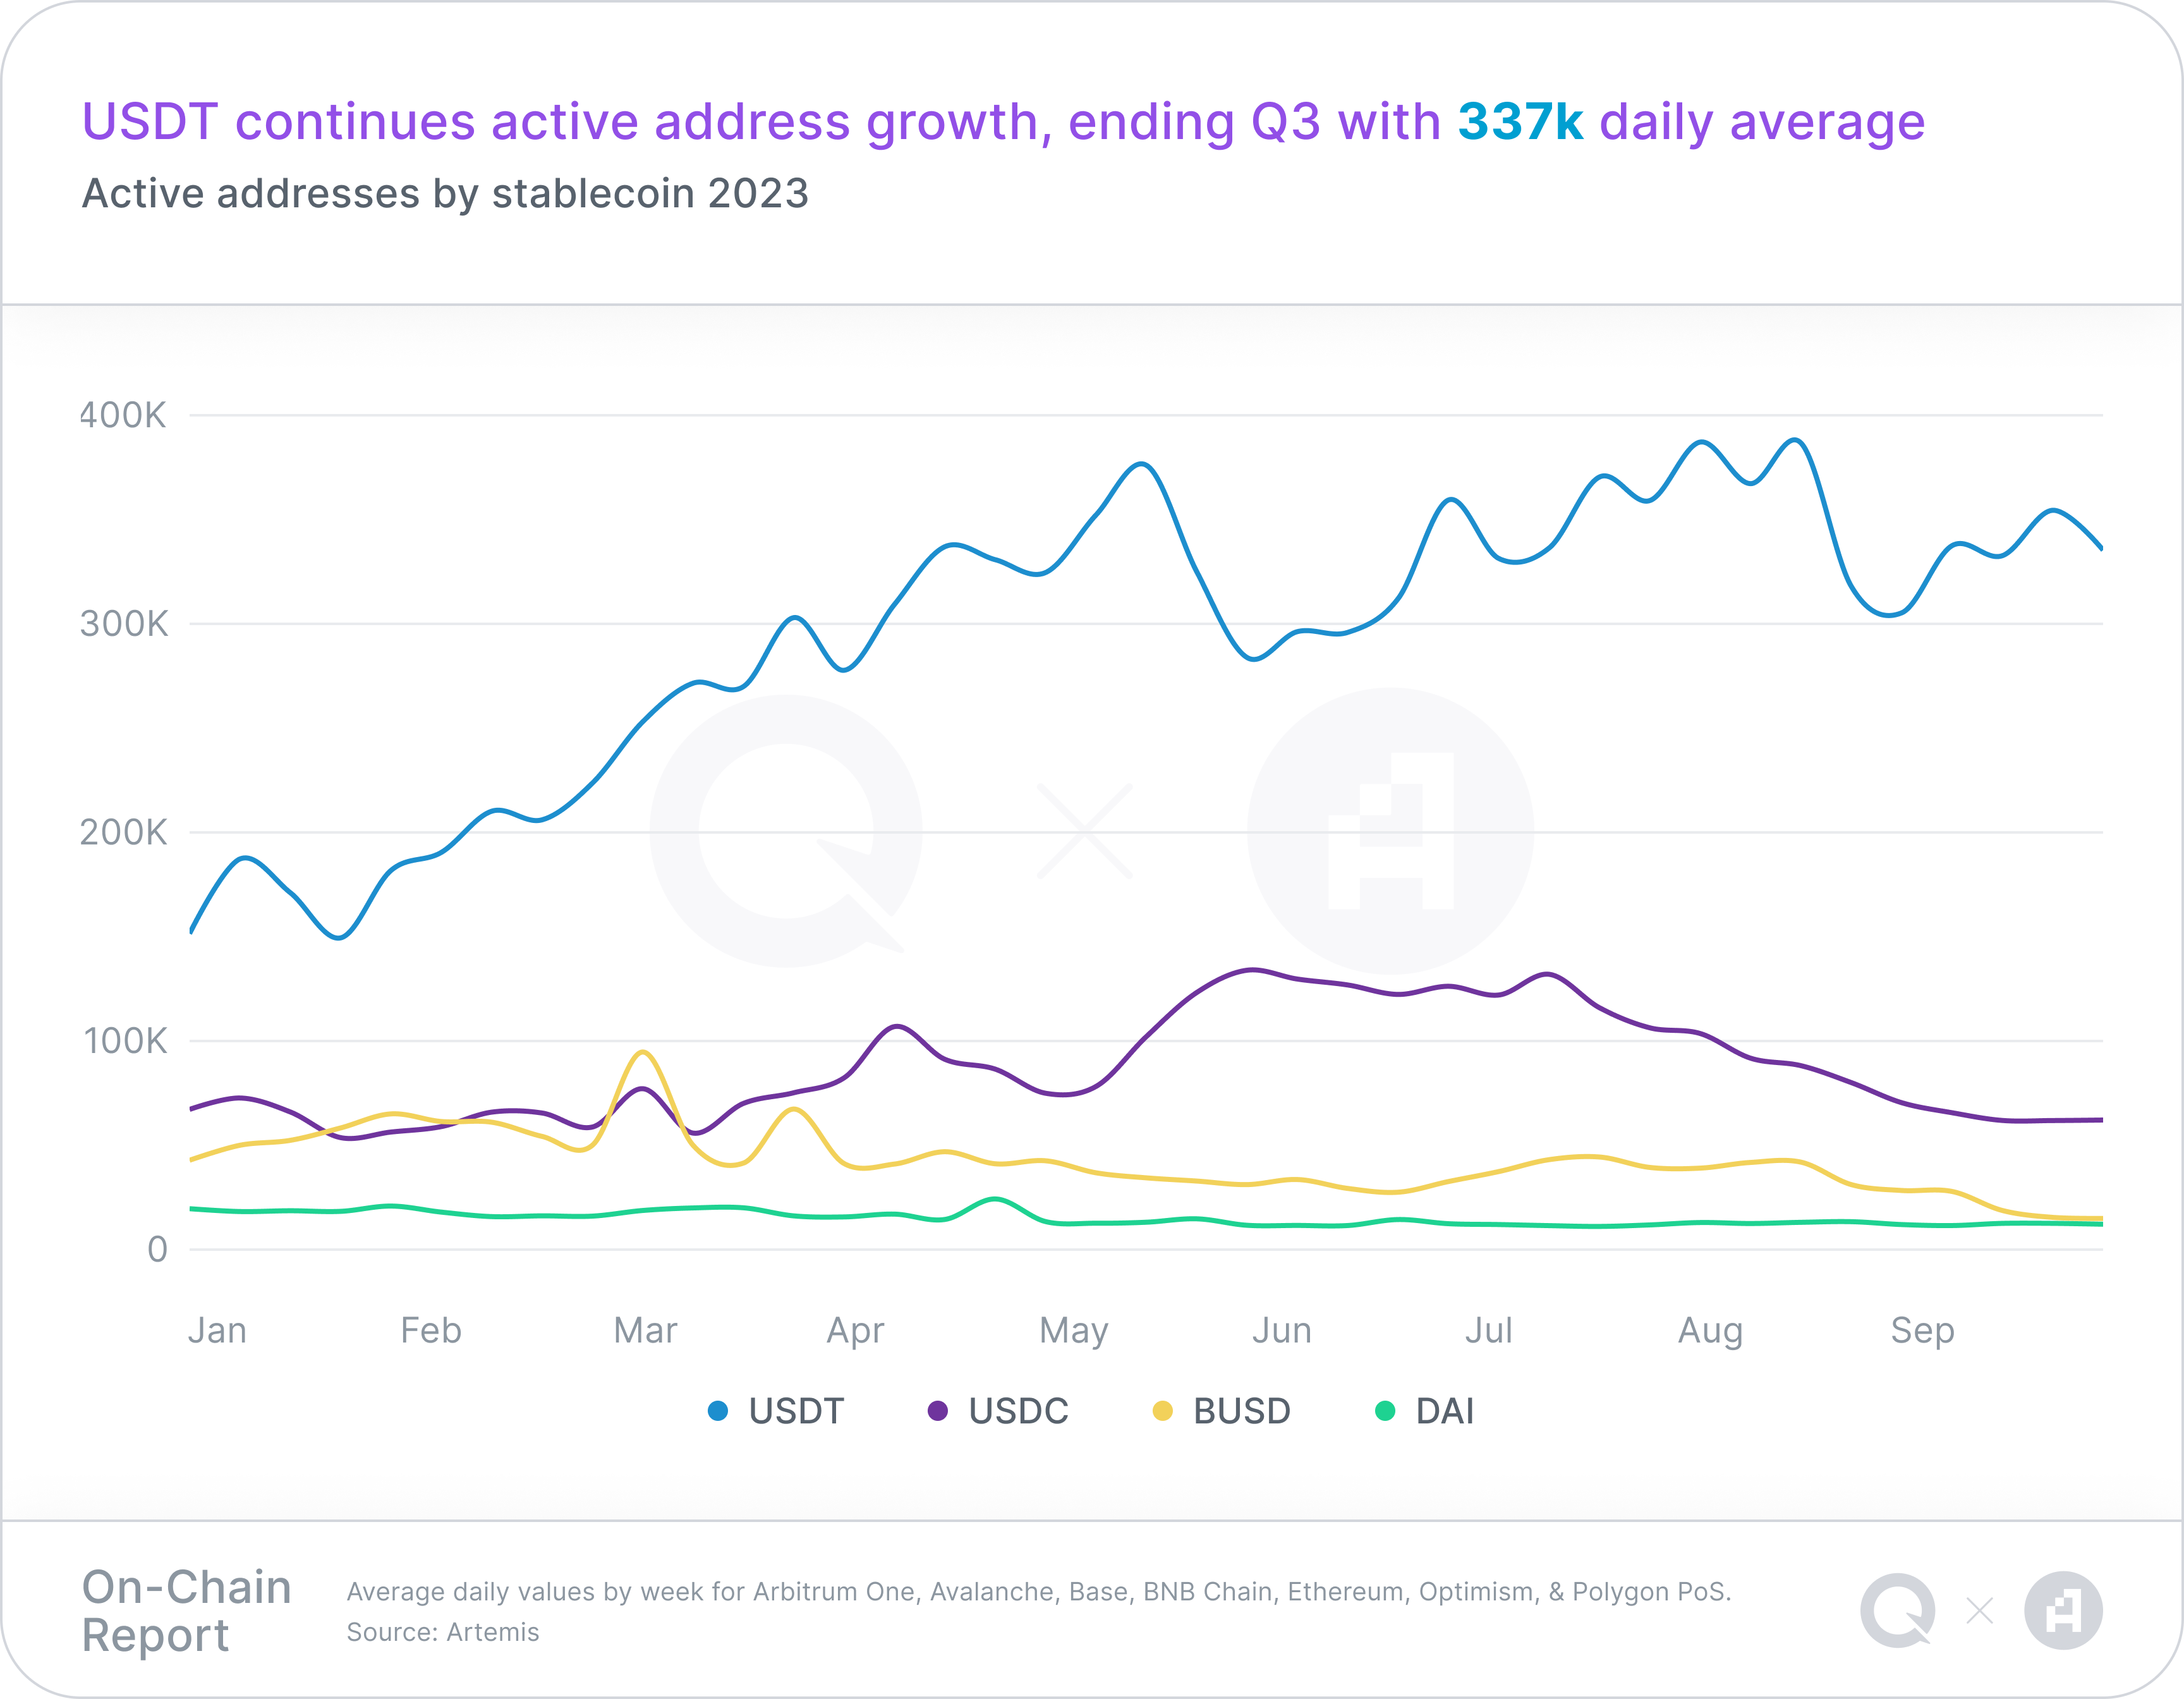 A chart representing active addresses by stablecoin 2023, with a takeaway headline of "USDT continues active address growth, ending Q3 with 337k daily average"